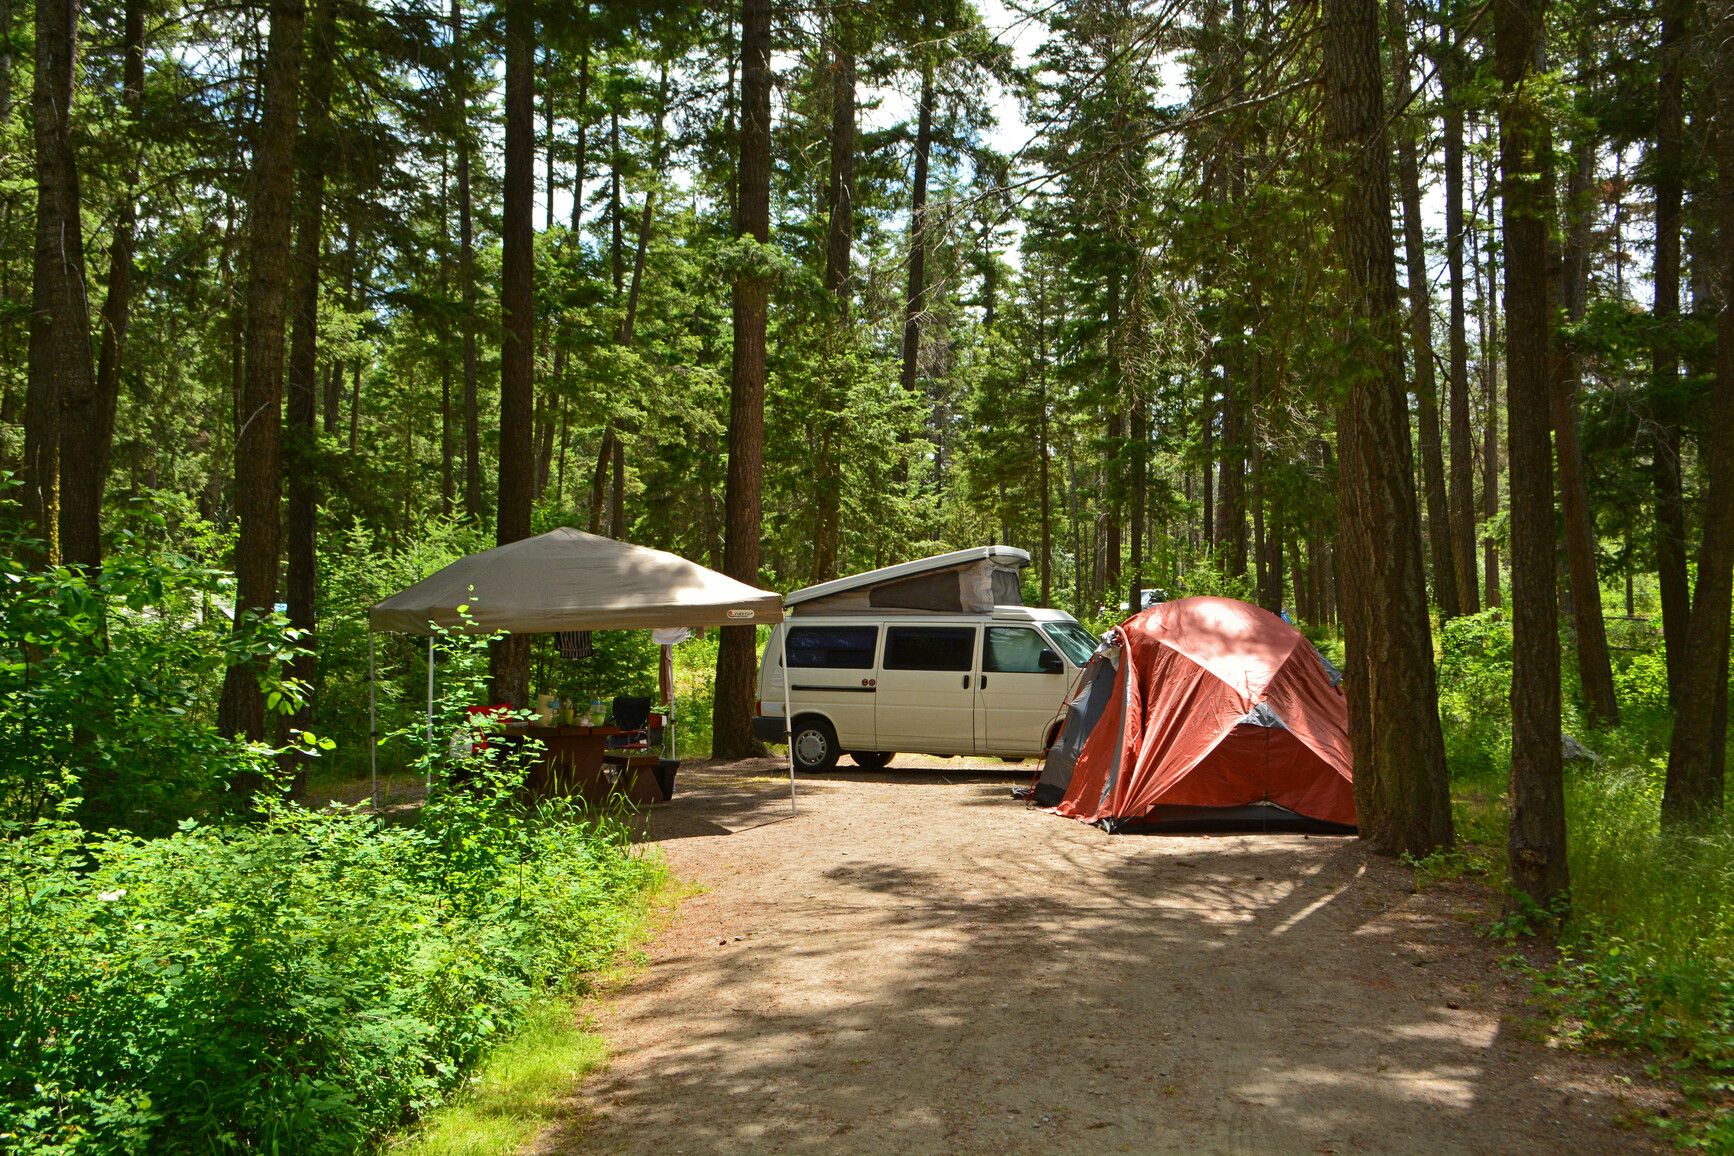 Frontcountry camping in Otter Lake Park provides private campsites surrounded by forest.